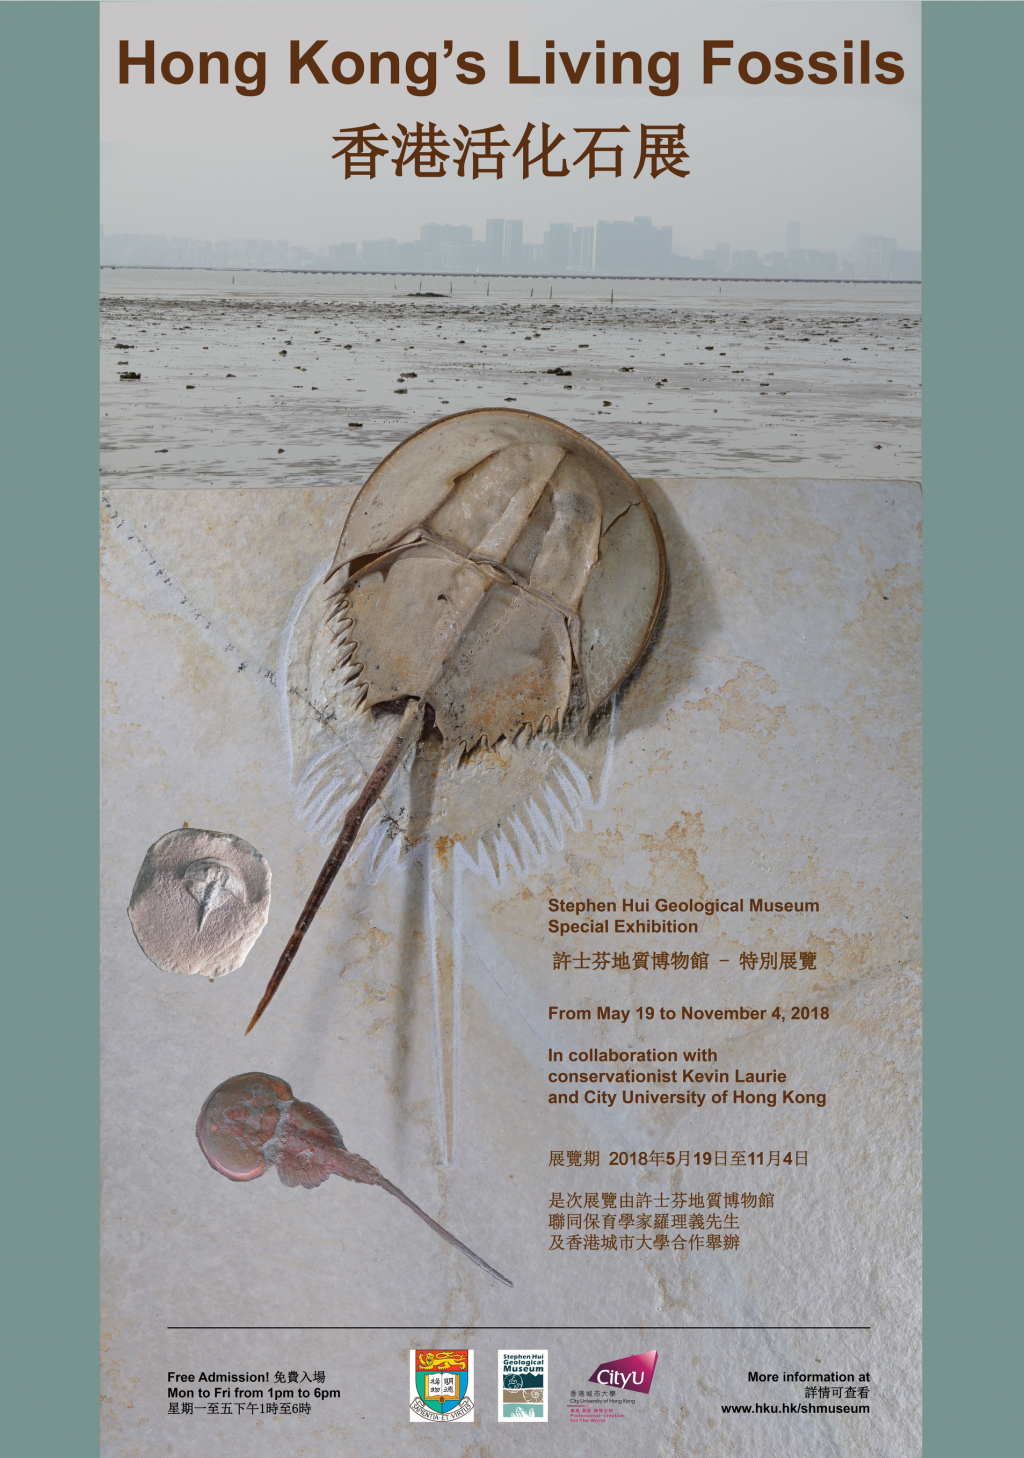 Stephen Hui Geological Museum - Special Exhibition